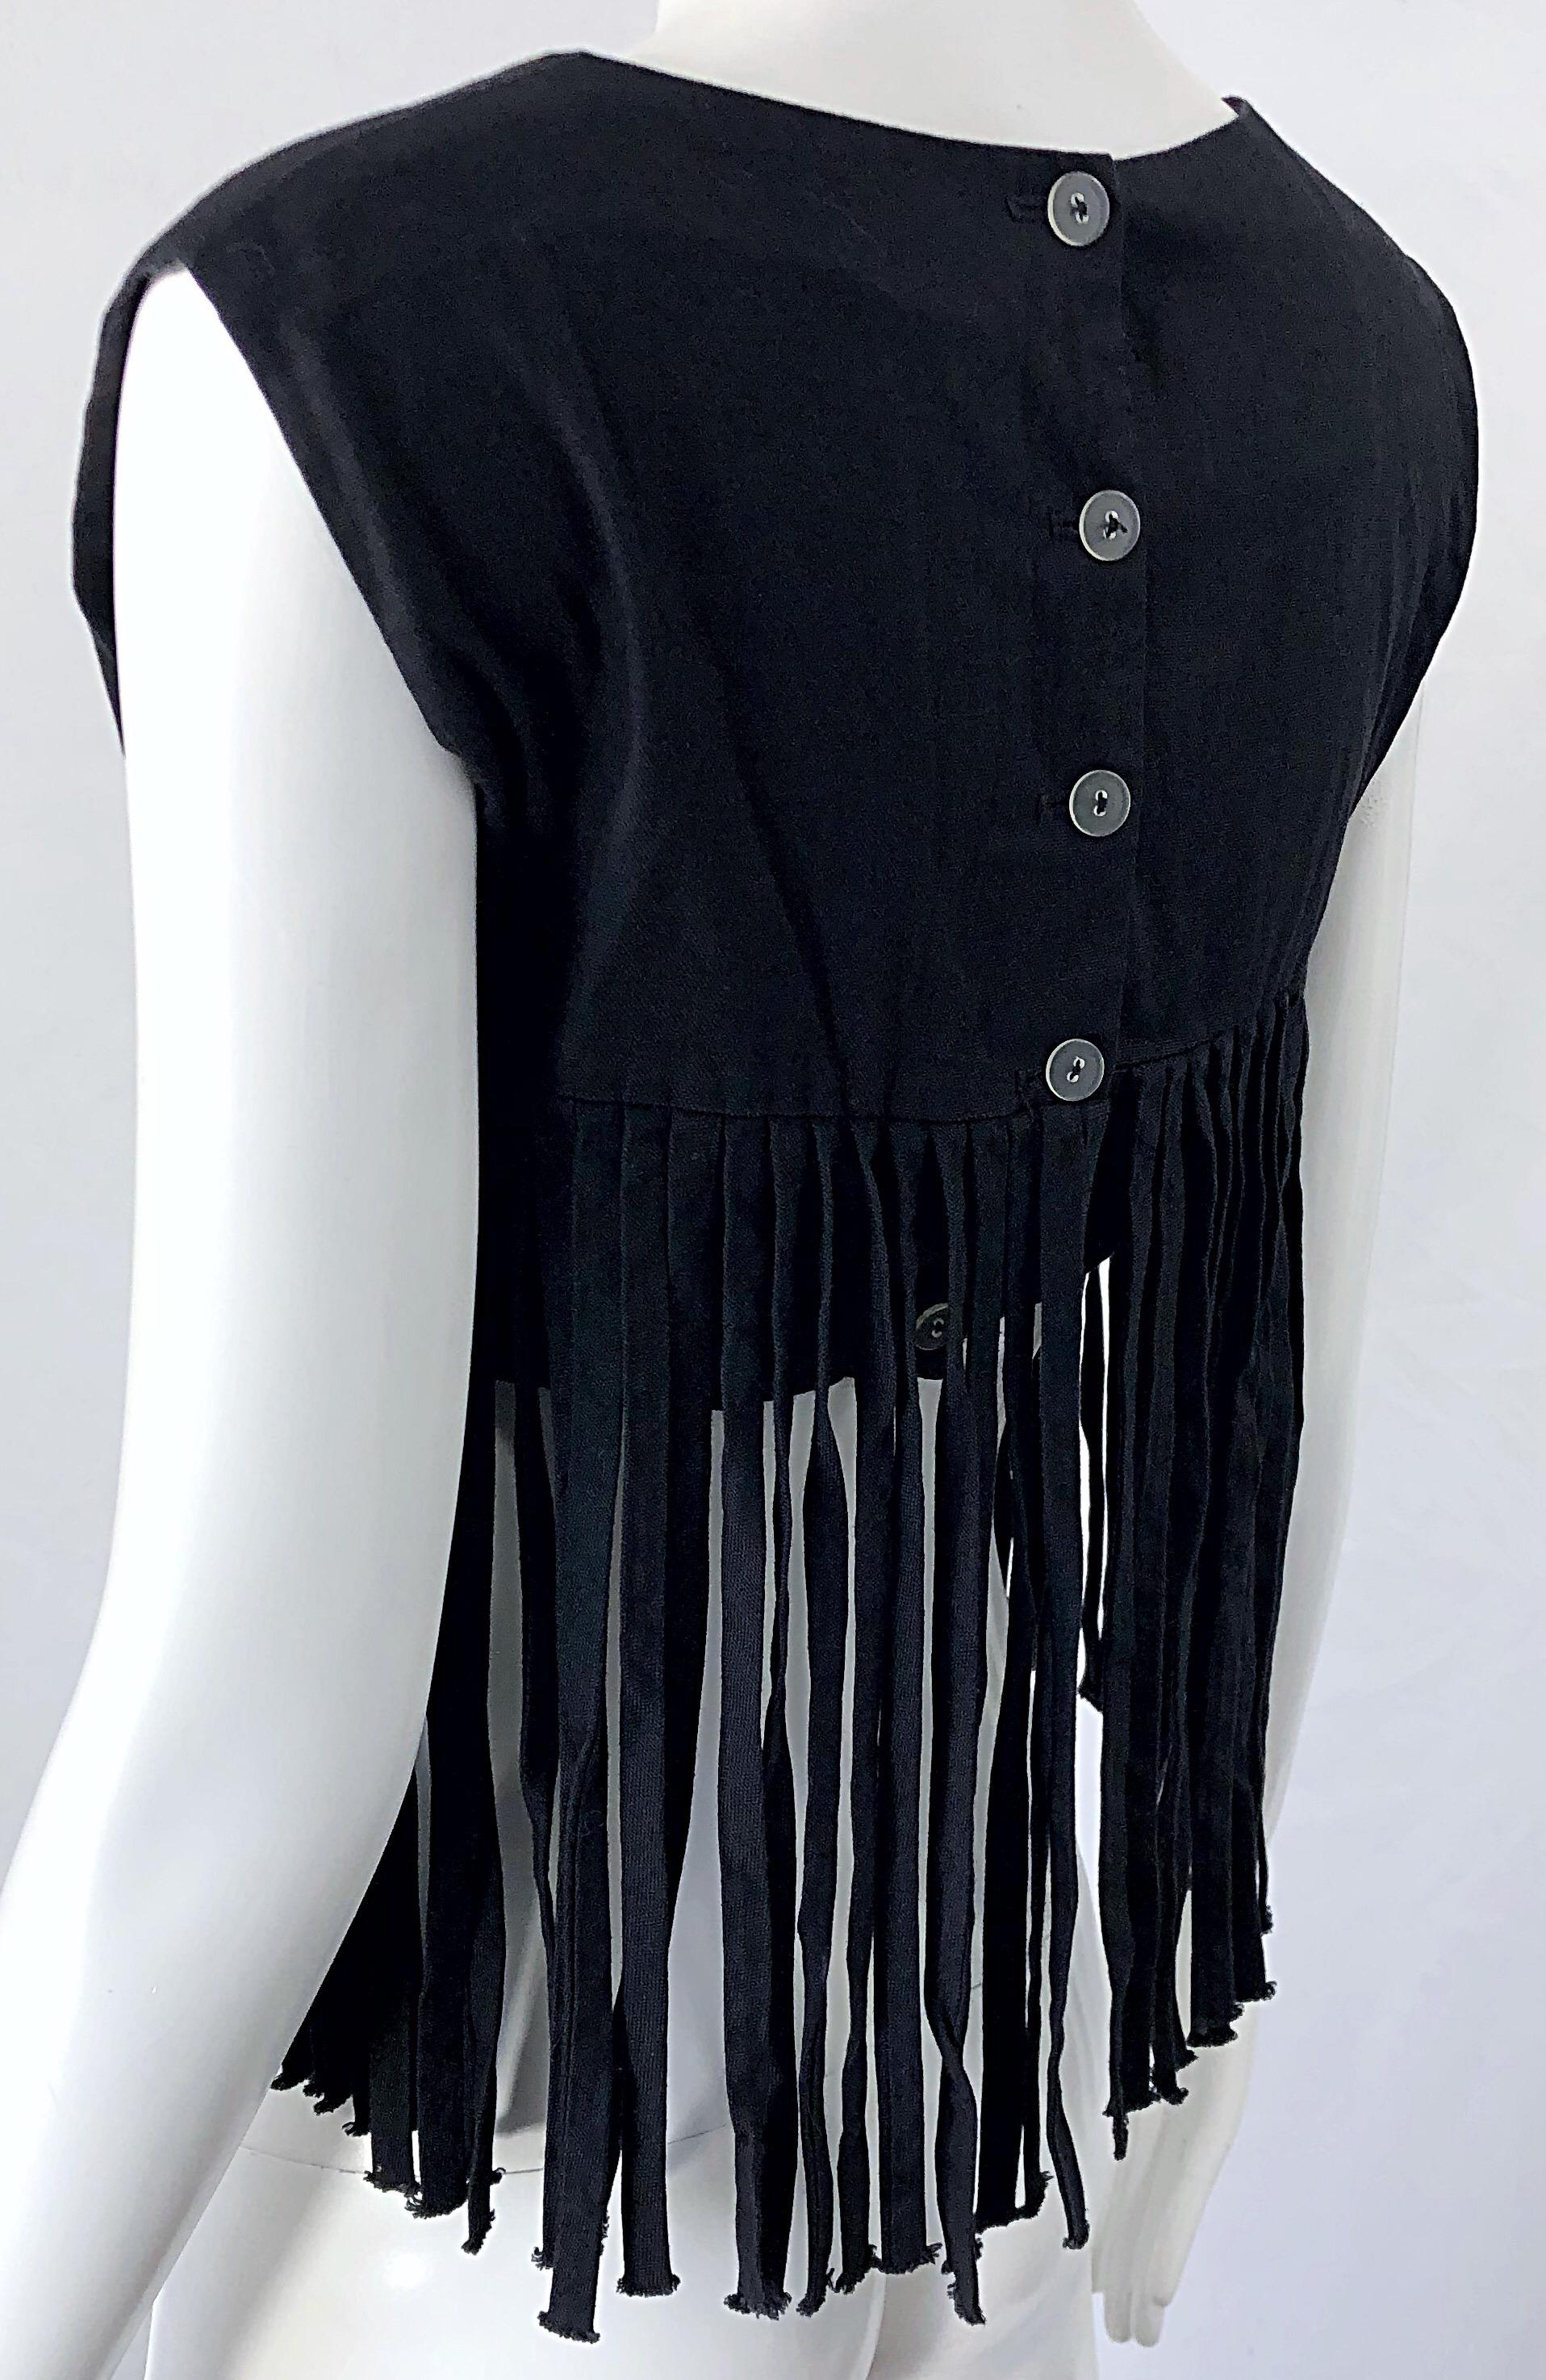 1970s Black Linen Fringe Vintage Boho Chic Festival 70s Crop Top Shirt Blouse In Excellent Condition For Sale In San Diego, CA